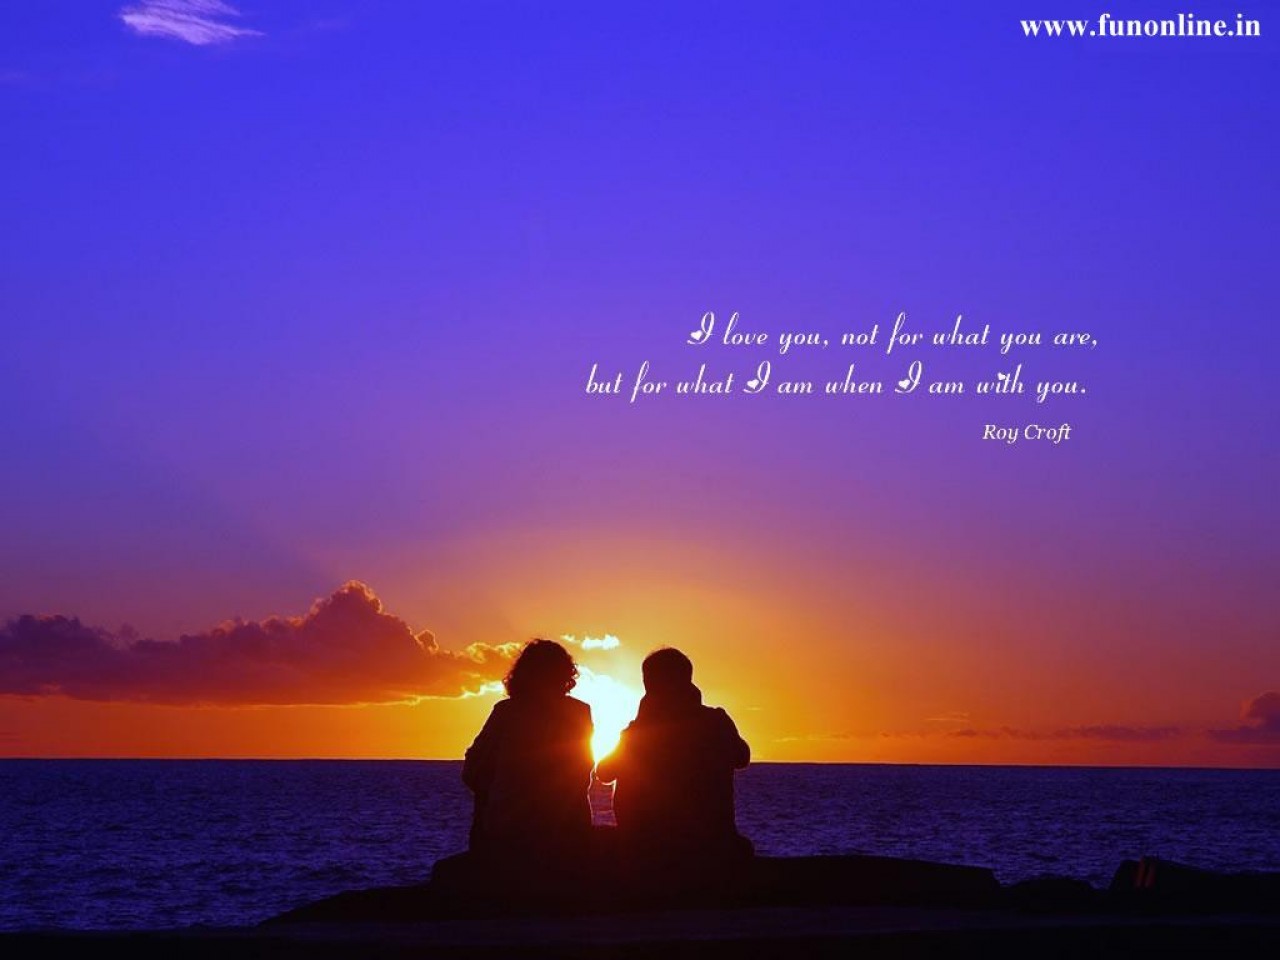 love quotes wallpapers Cool Wallpapers HD 1080p | WallpapersLoka.com